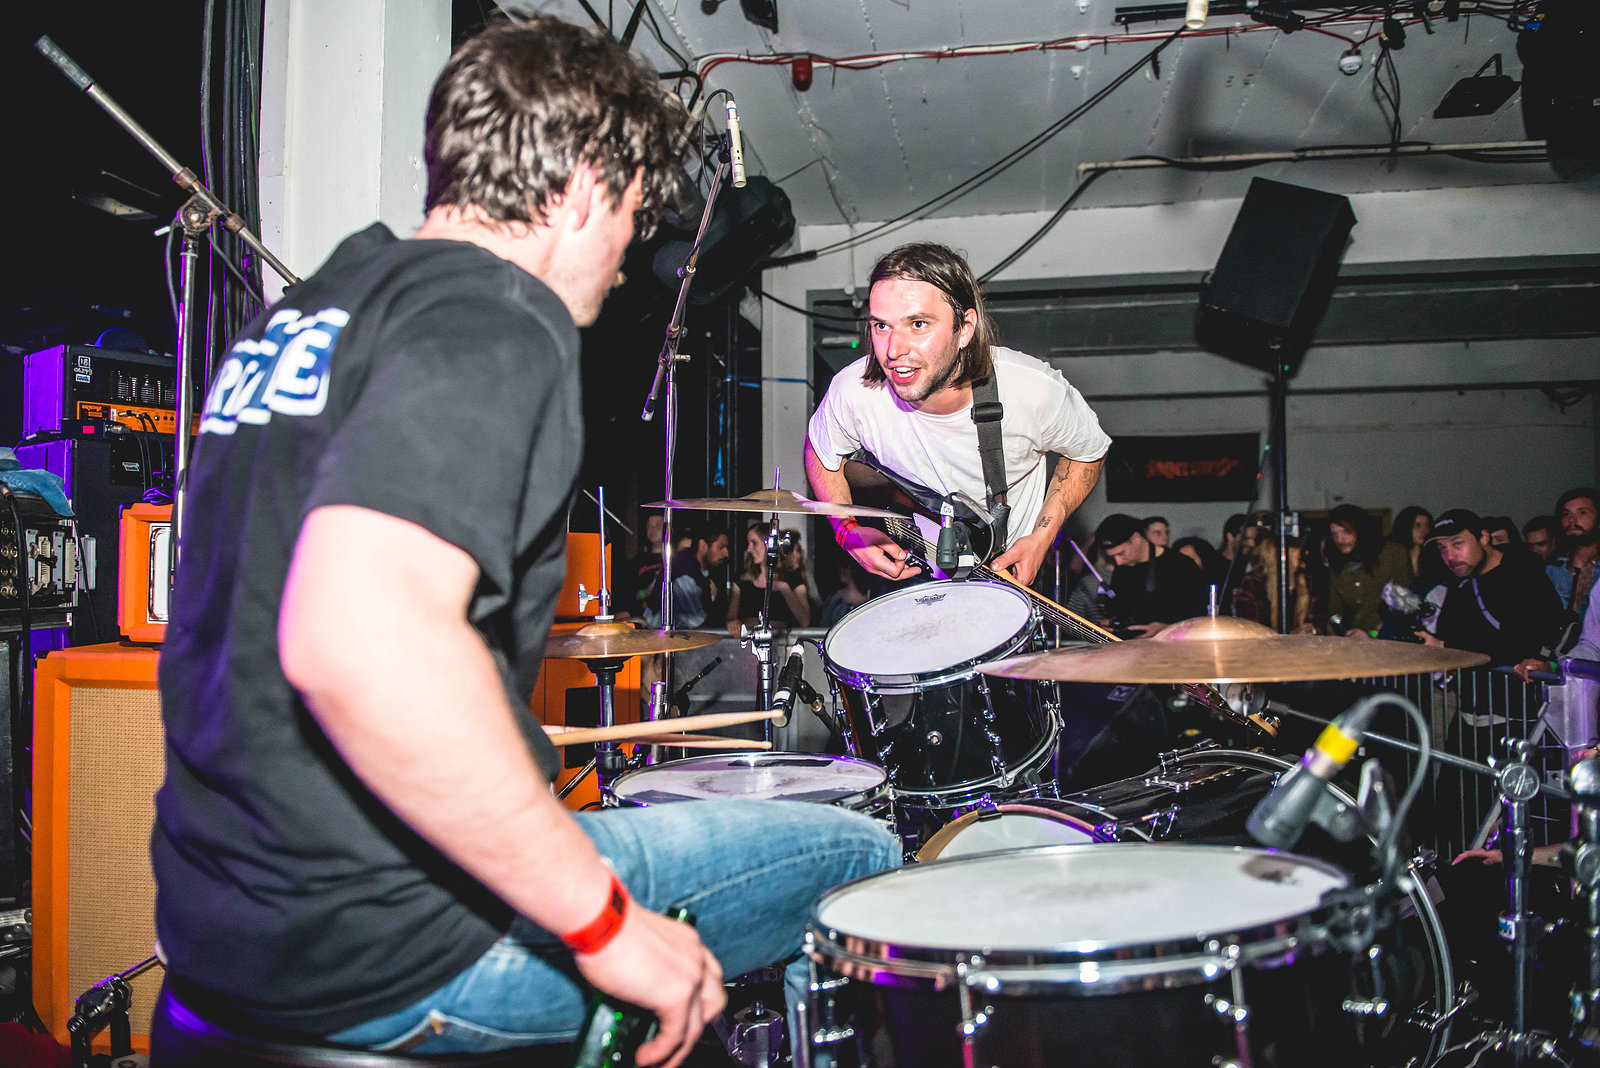 Virgin Kids at the Fluffer Pit Party at Shapes, May 2016